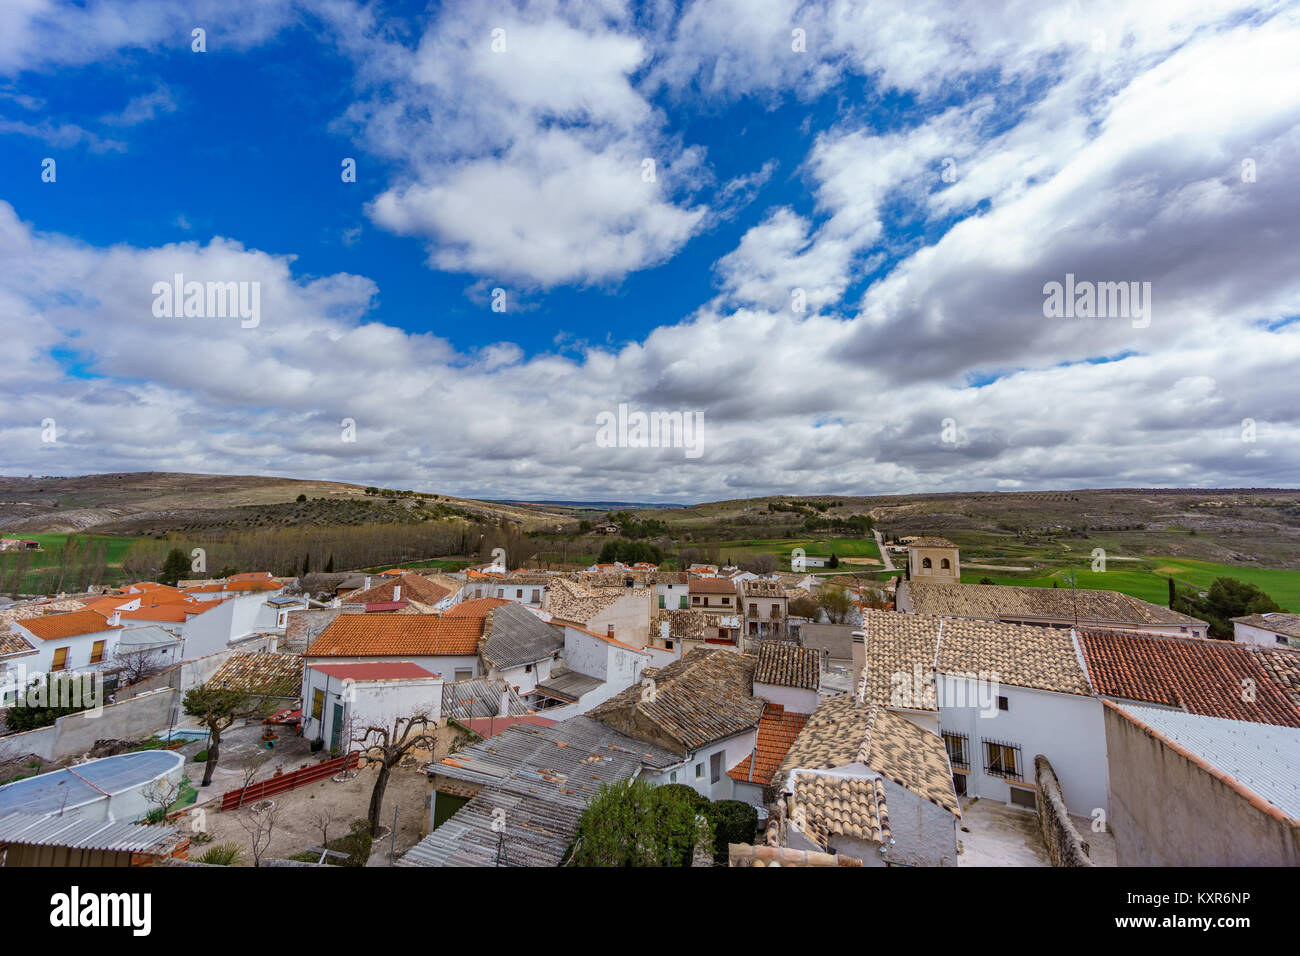 Ucles village roofs, cloudy sky Stock Photo